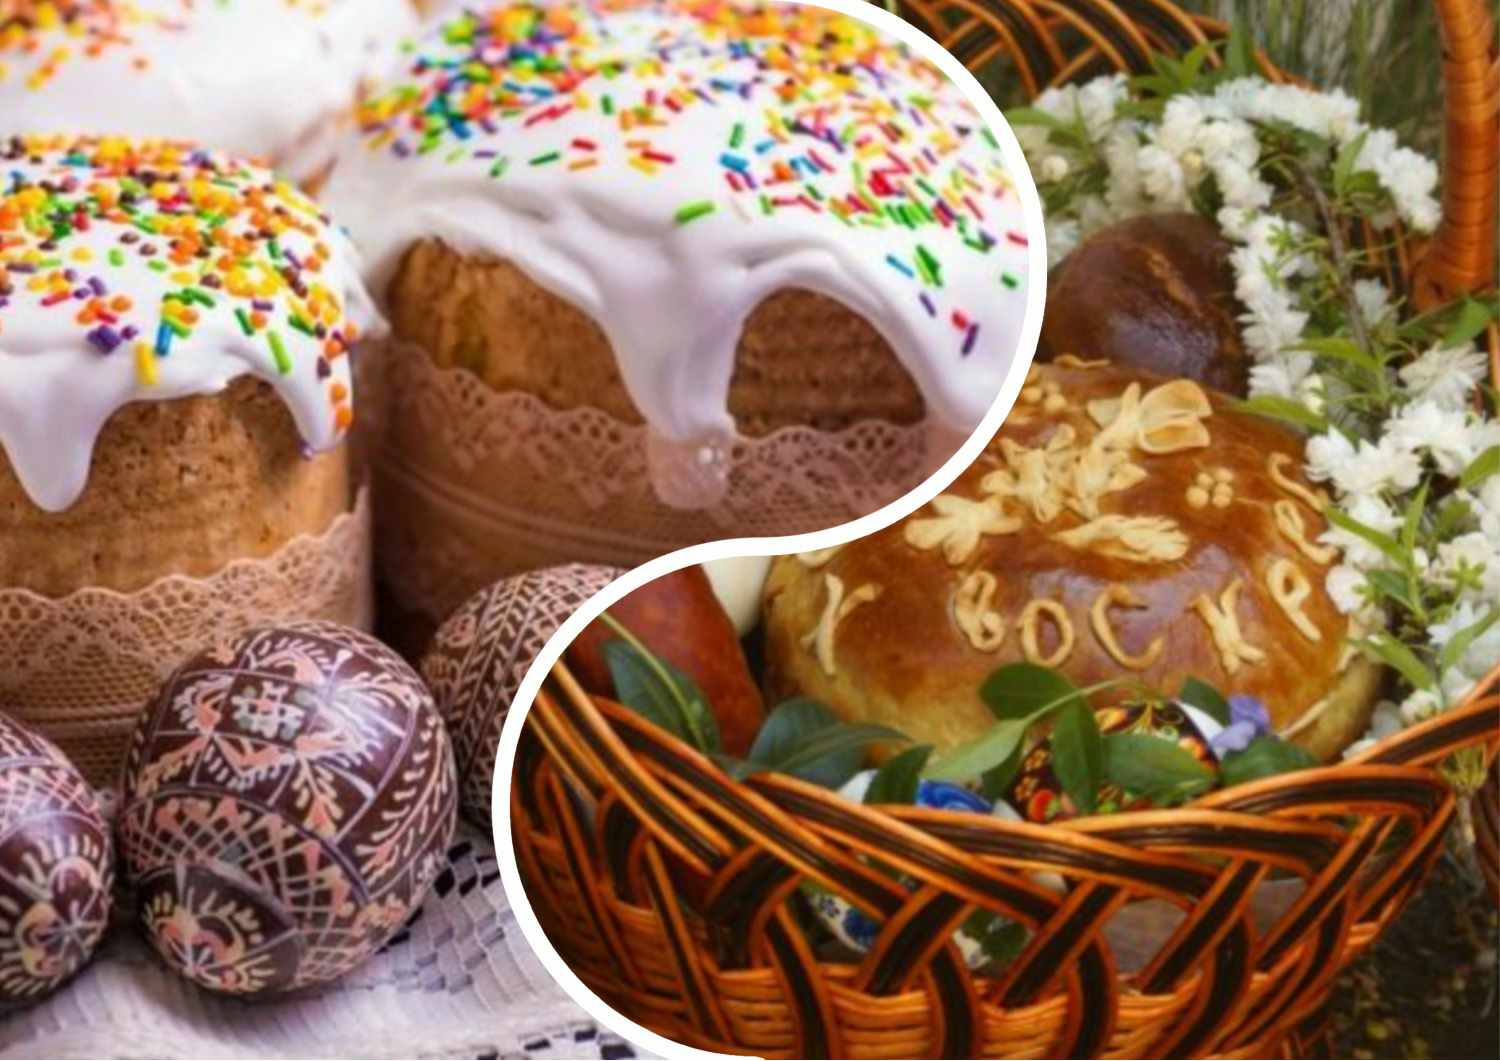 One holiday and mixed up dates: in Transcarpathia, Roman Catholics and Greek Catholics celebrate Easter together